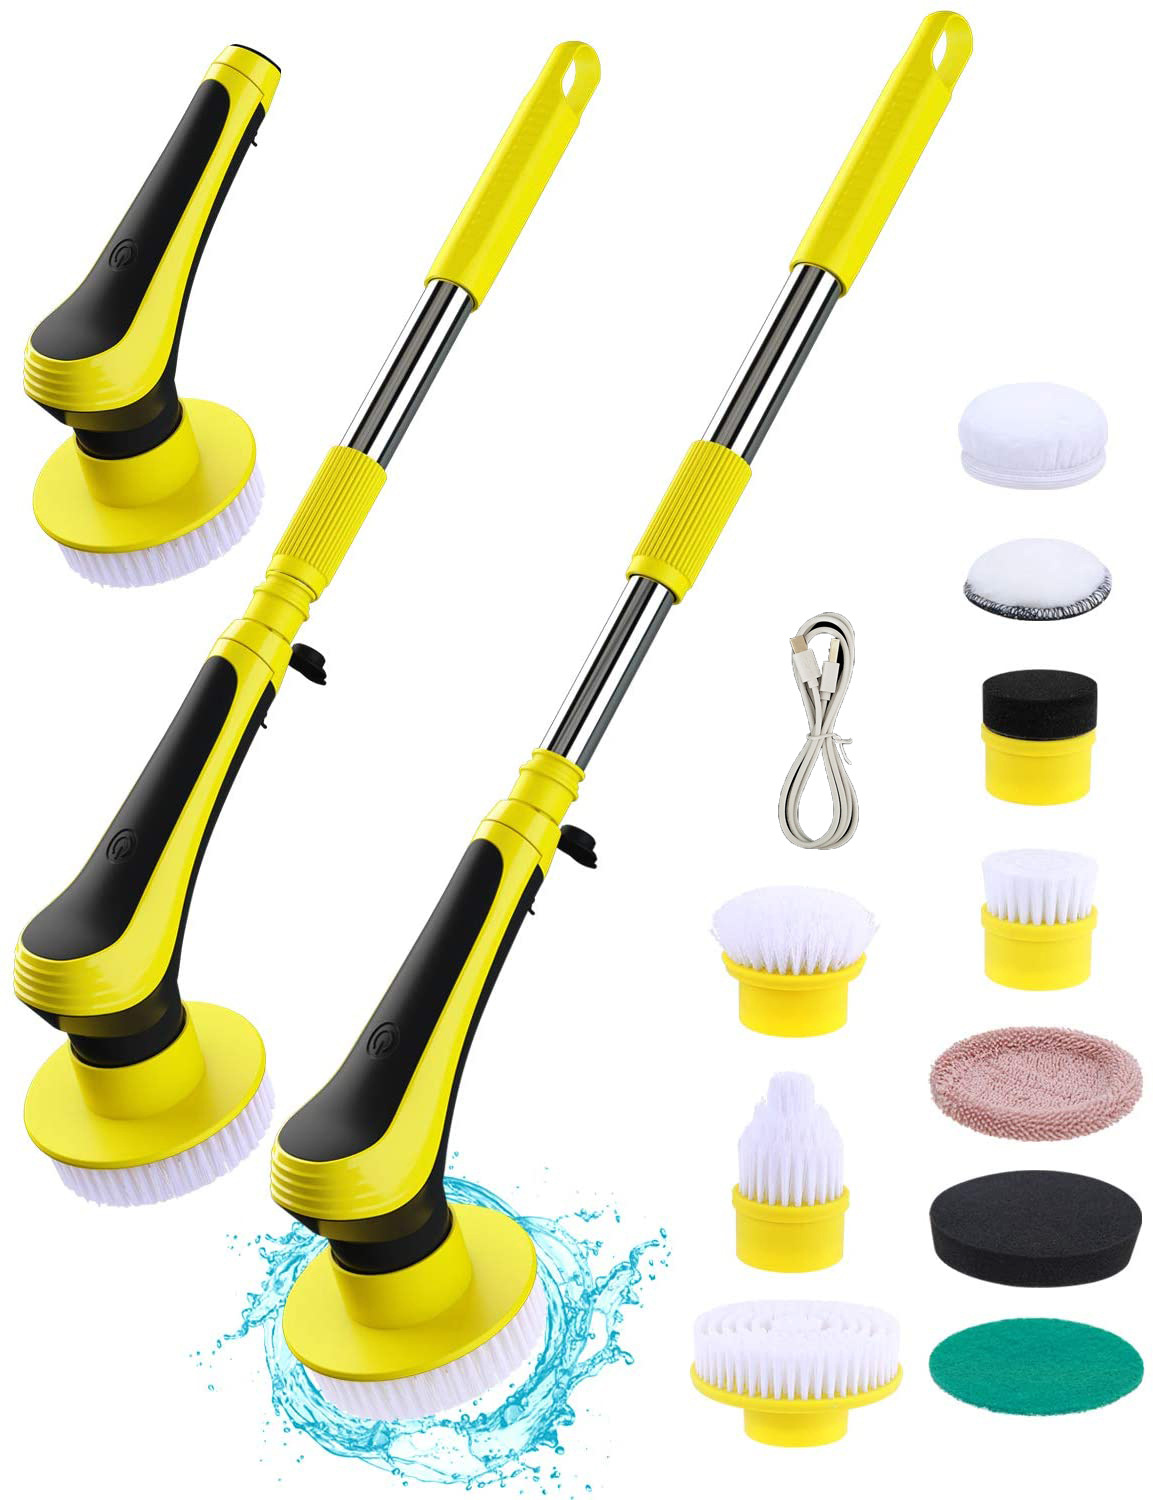 Electric cleaning brushes: which one should you buy and why